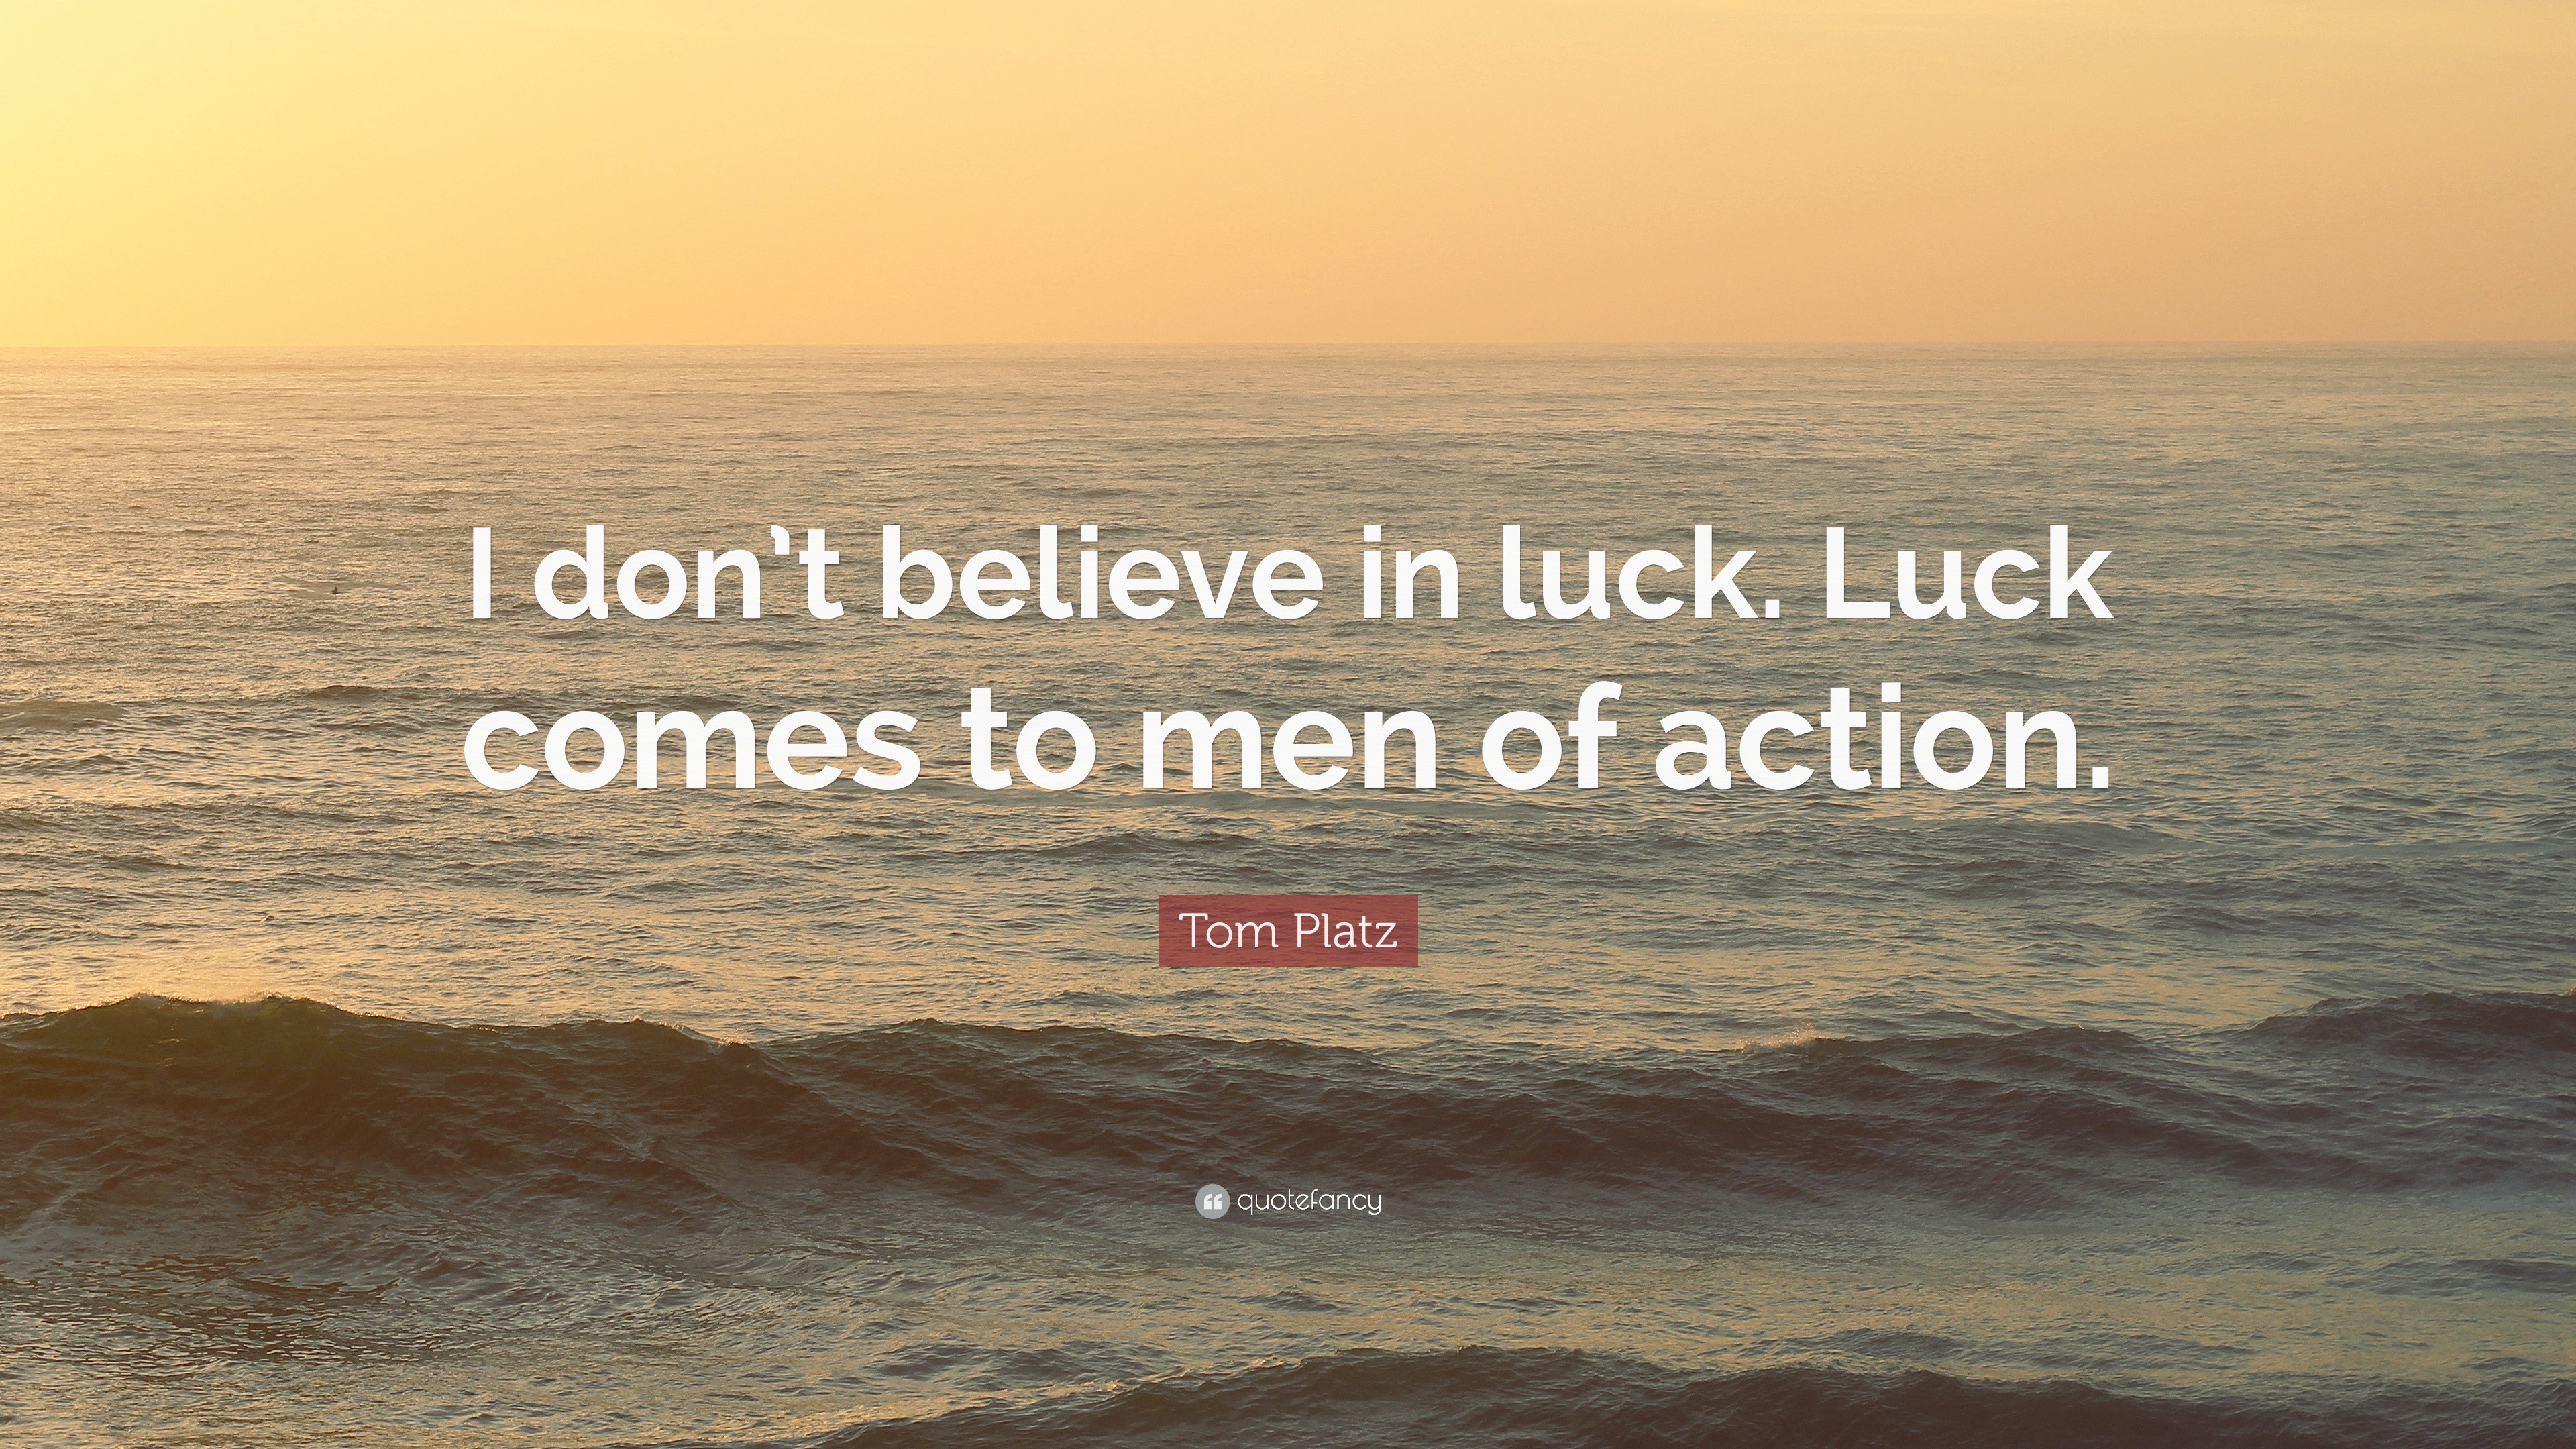 Tom Platz Quote: “I Don’t Believe In Luck. Luck Comes To Men Of Action.”